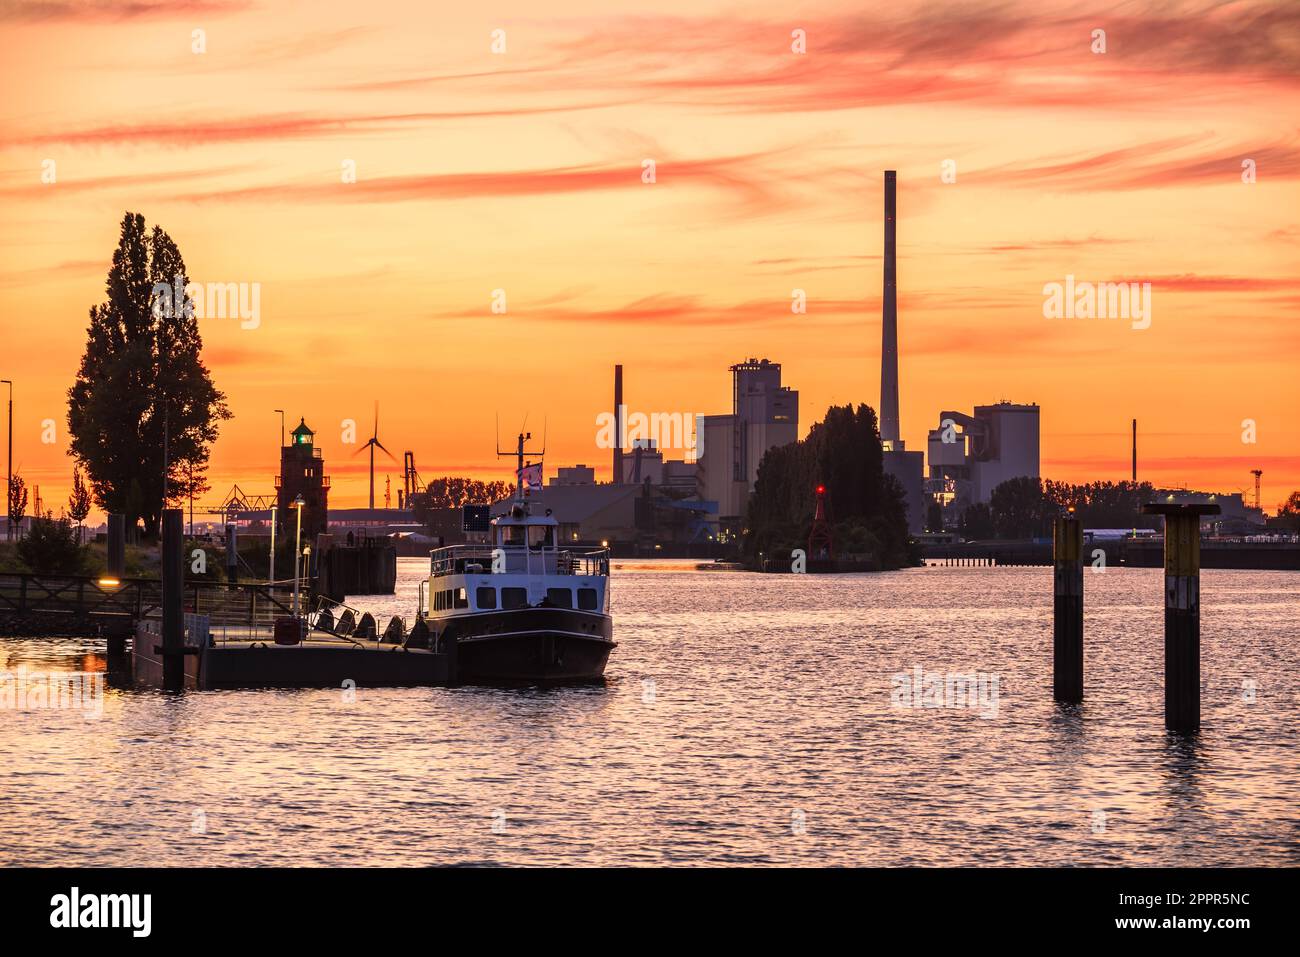 Orange sunset sky over a river harbour. Factories and wind turbines are in background. Stock Photo